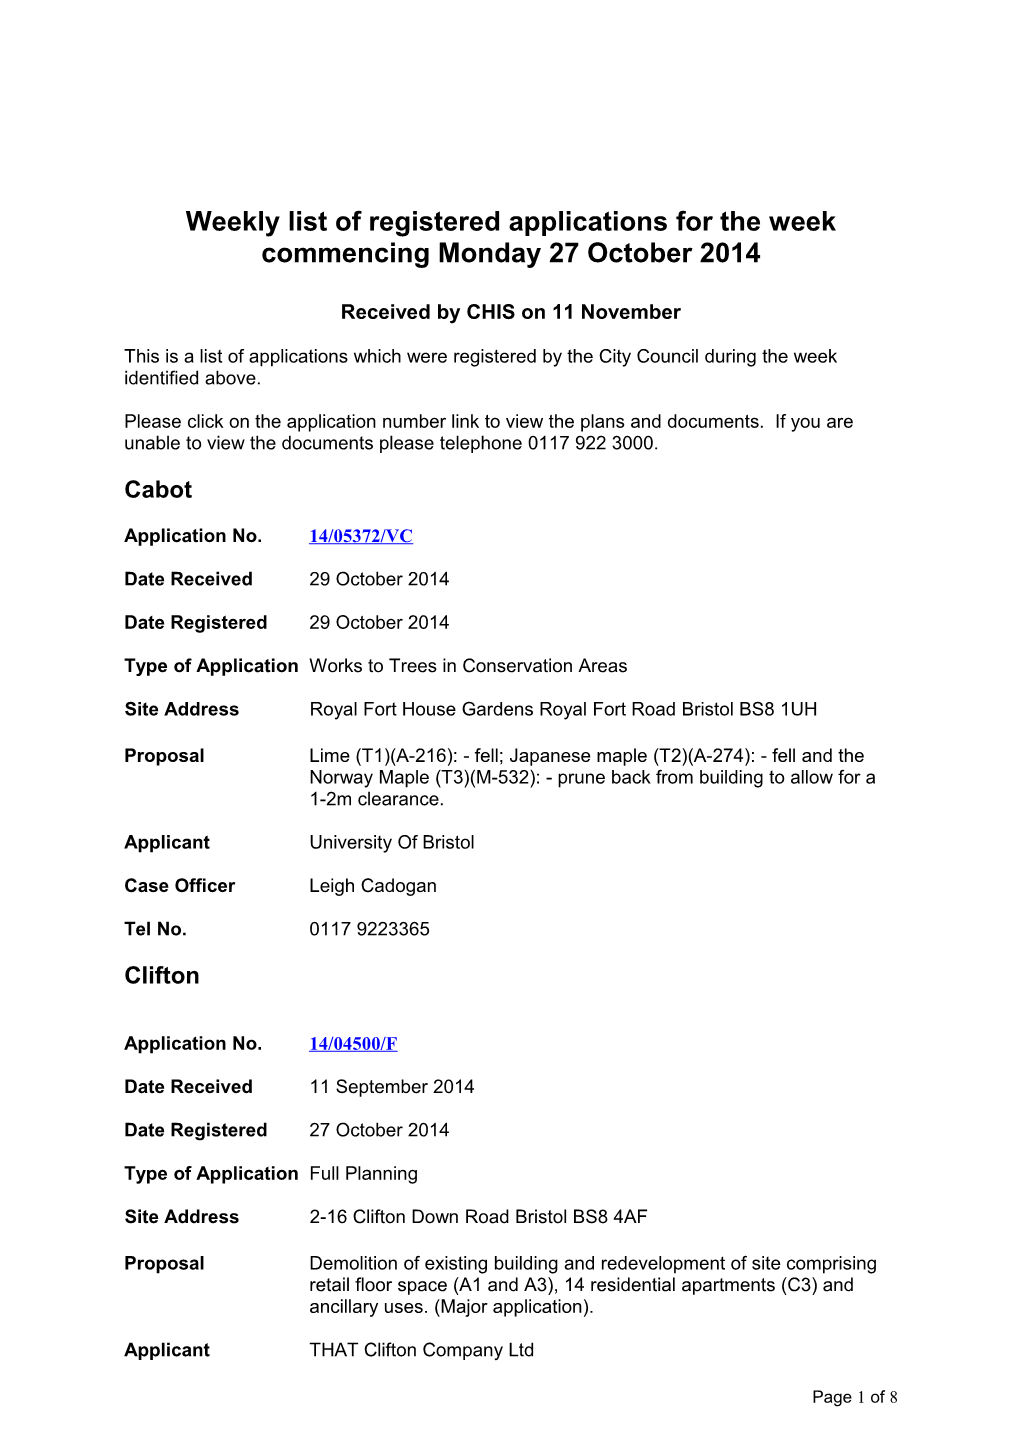 Weekly List of Registered Applications for the Week Commencing Monday 27 October 2014